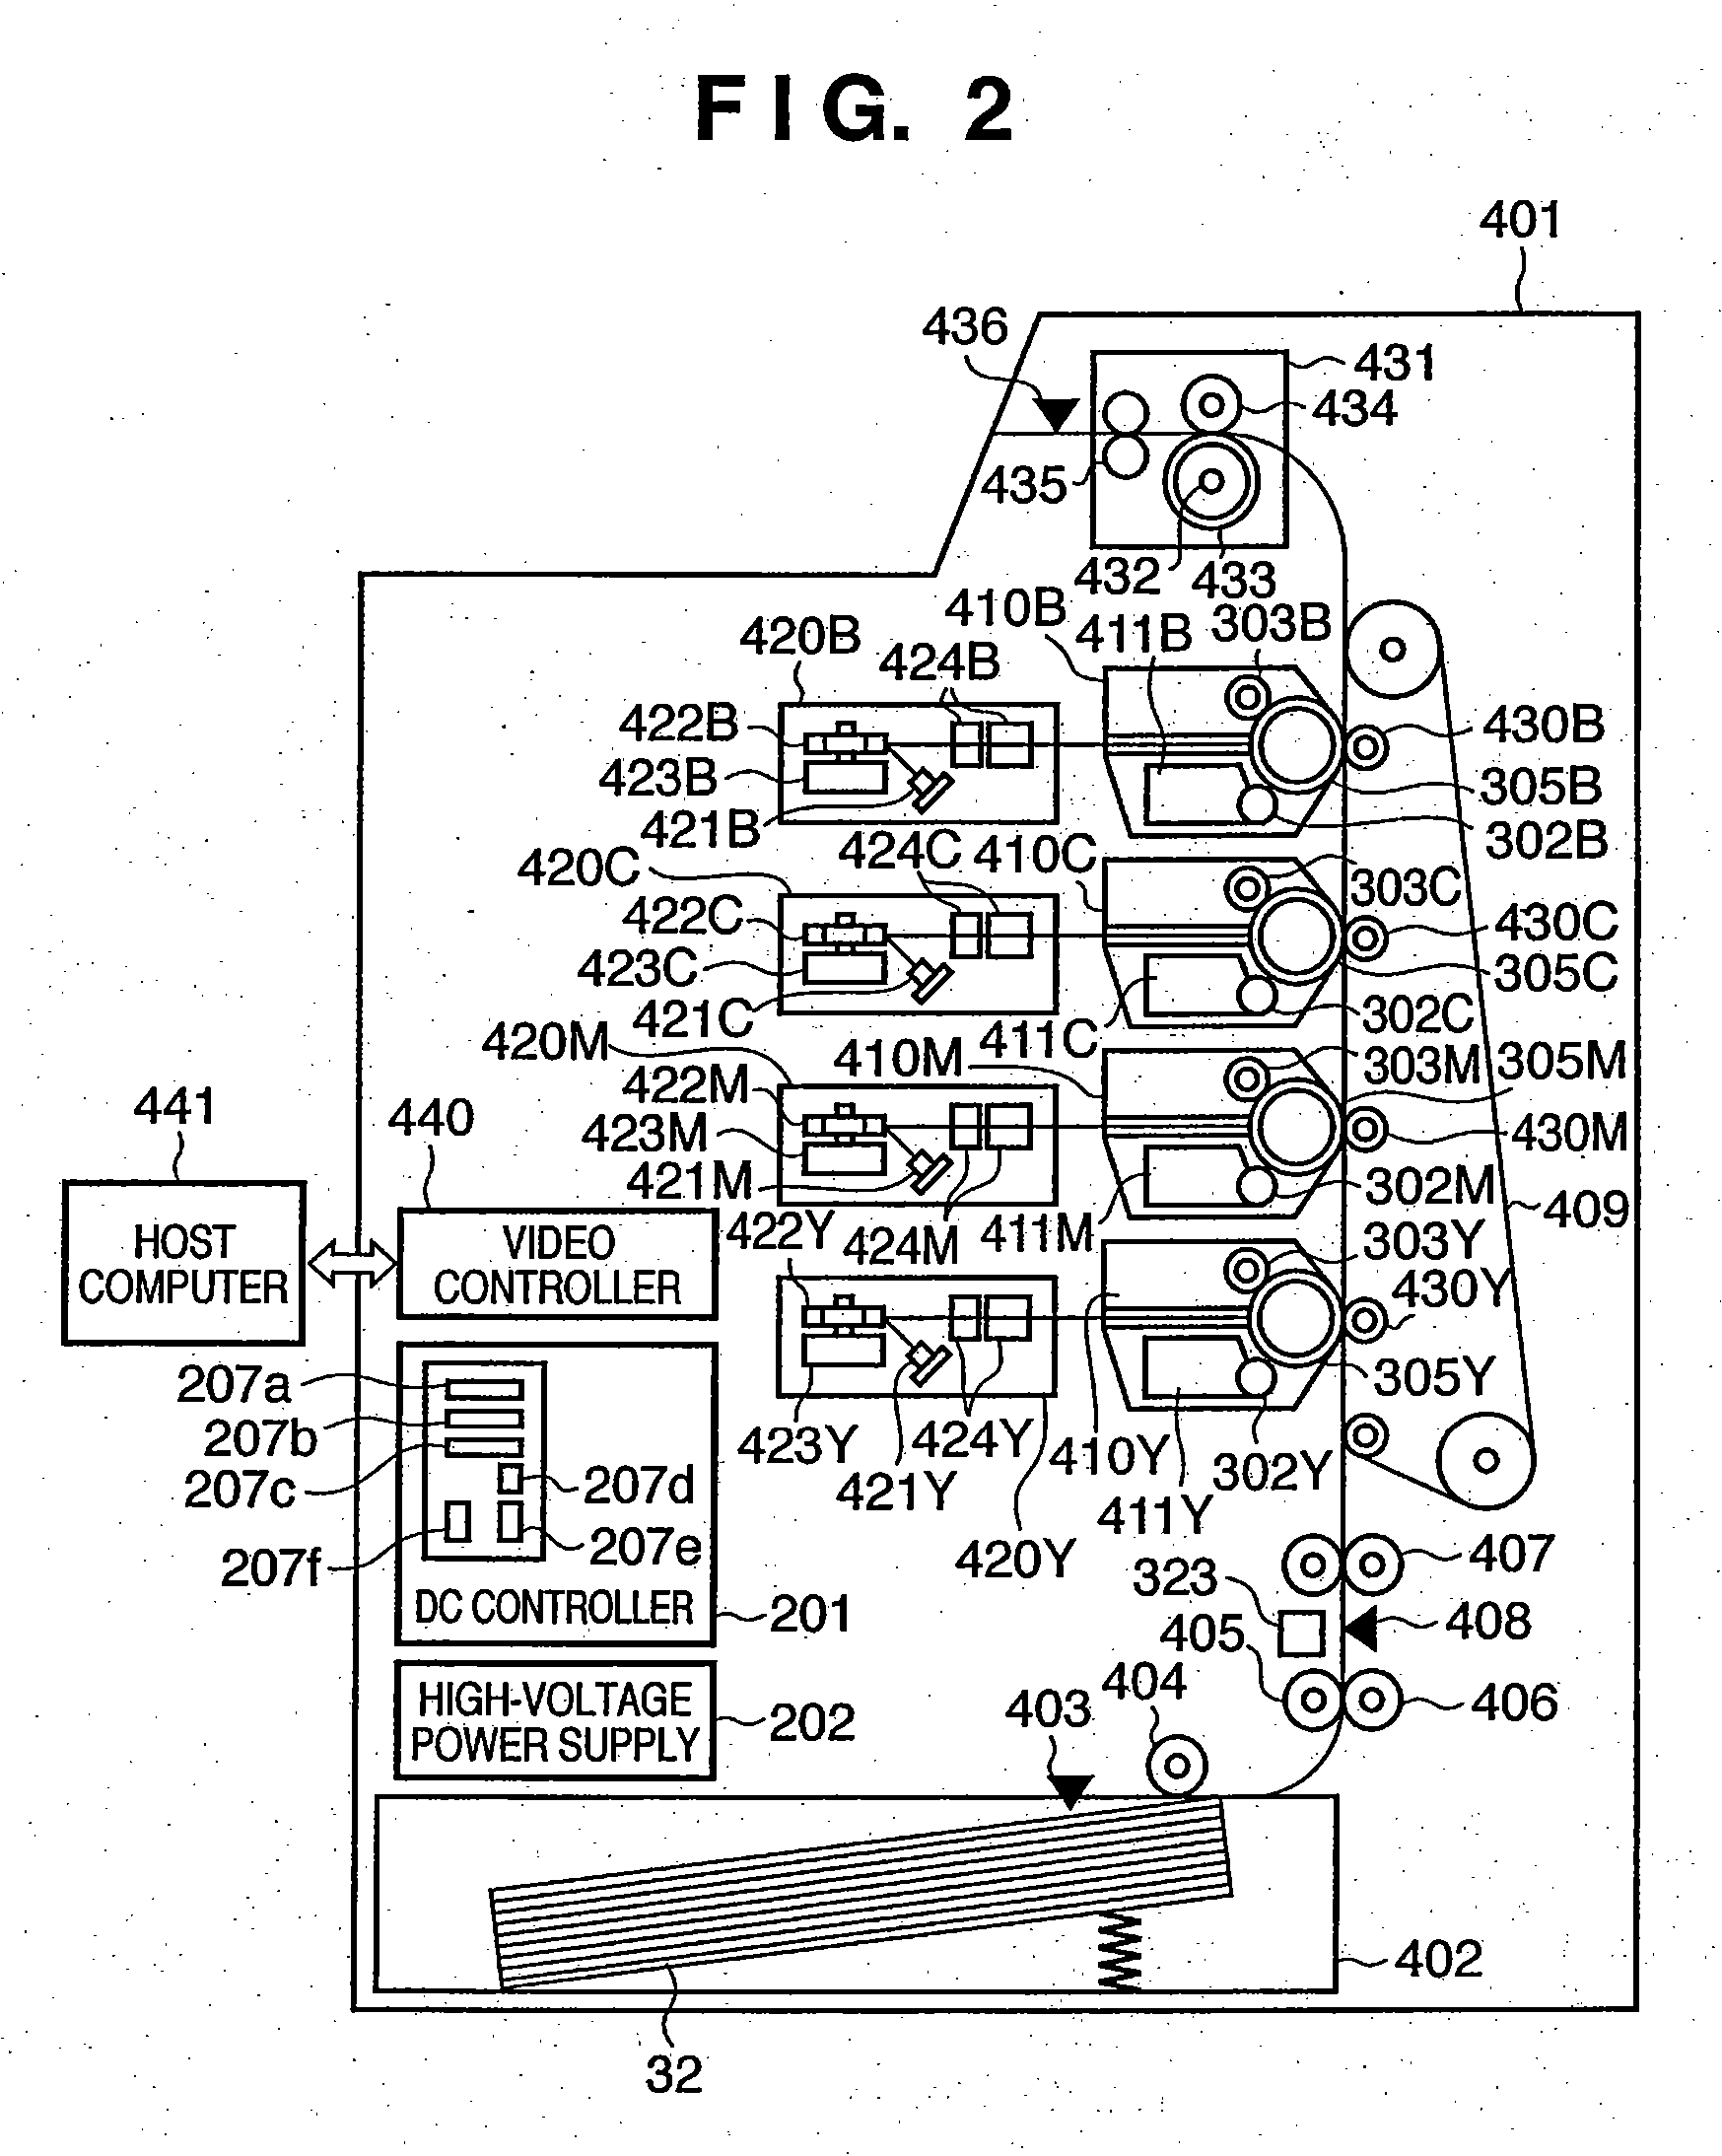 Power supply unit in image forming apparatus